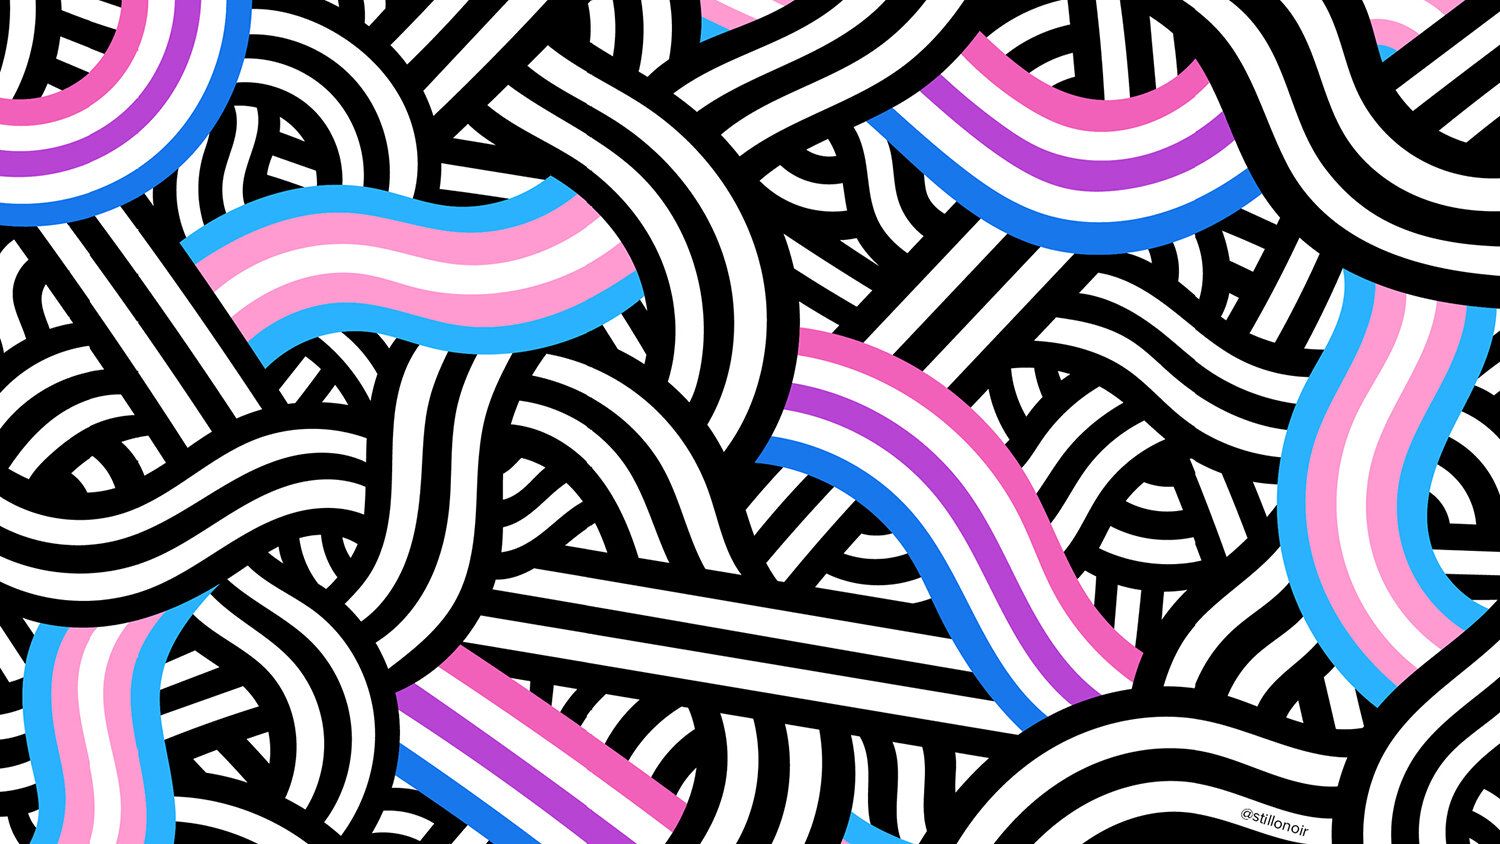 A pattern of black and white lines with the trans flag colours superimposed on top. - Pride